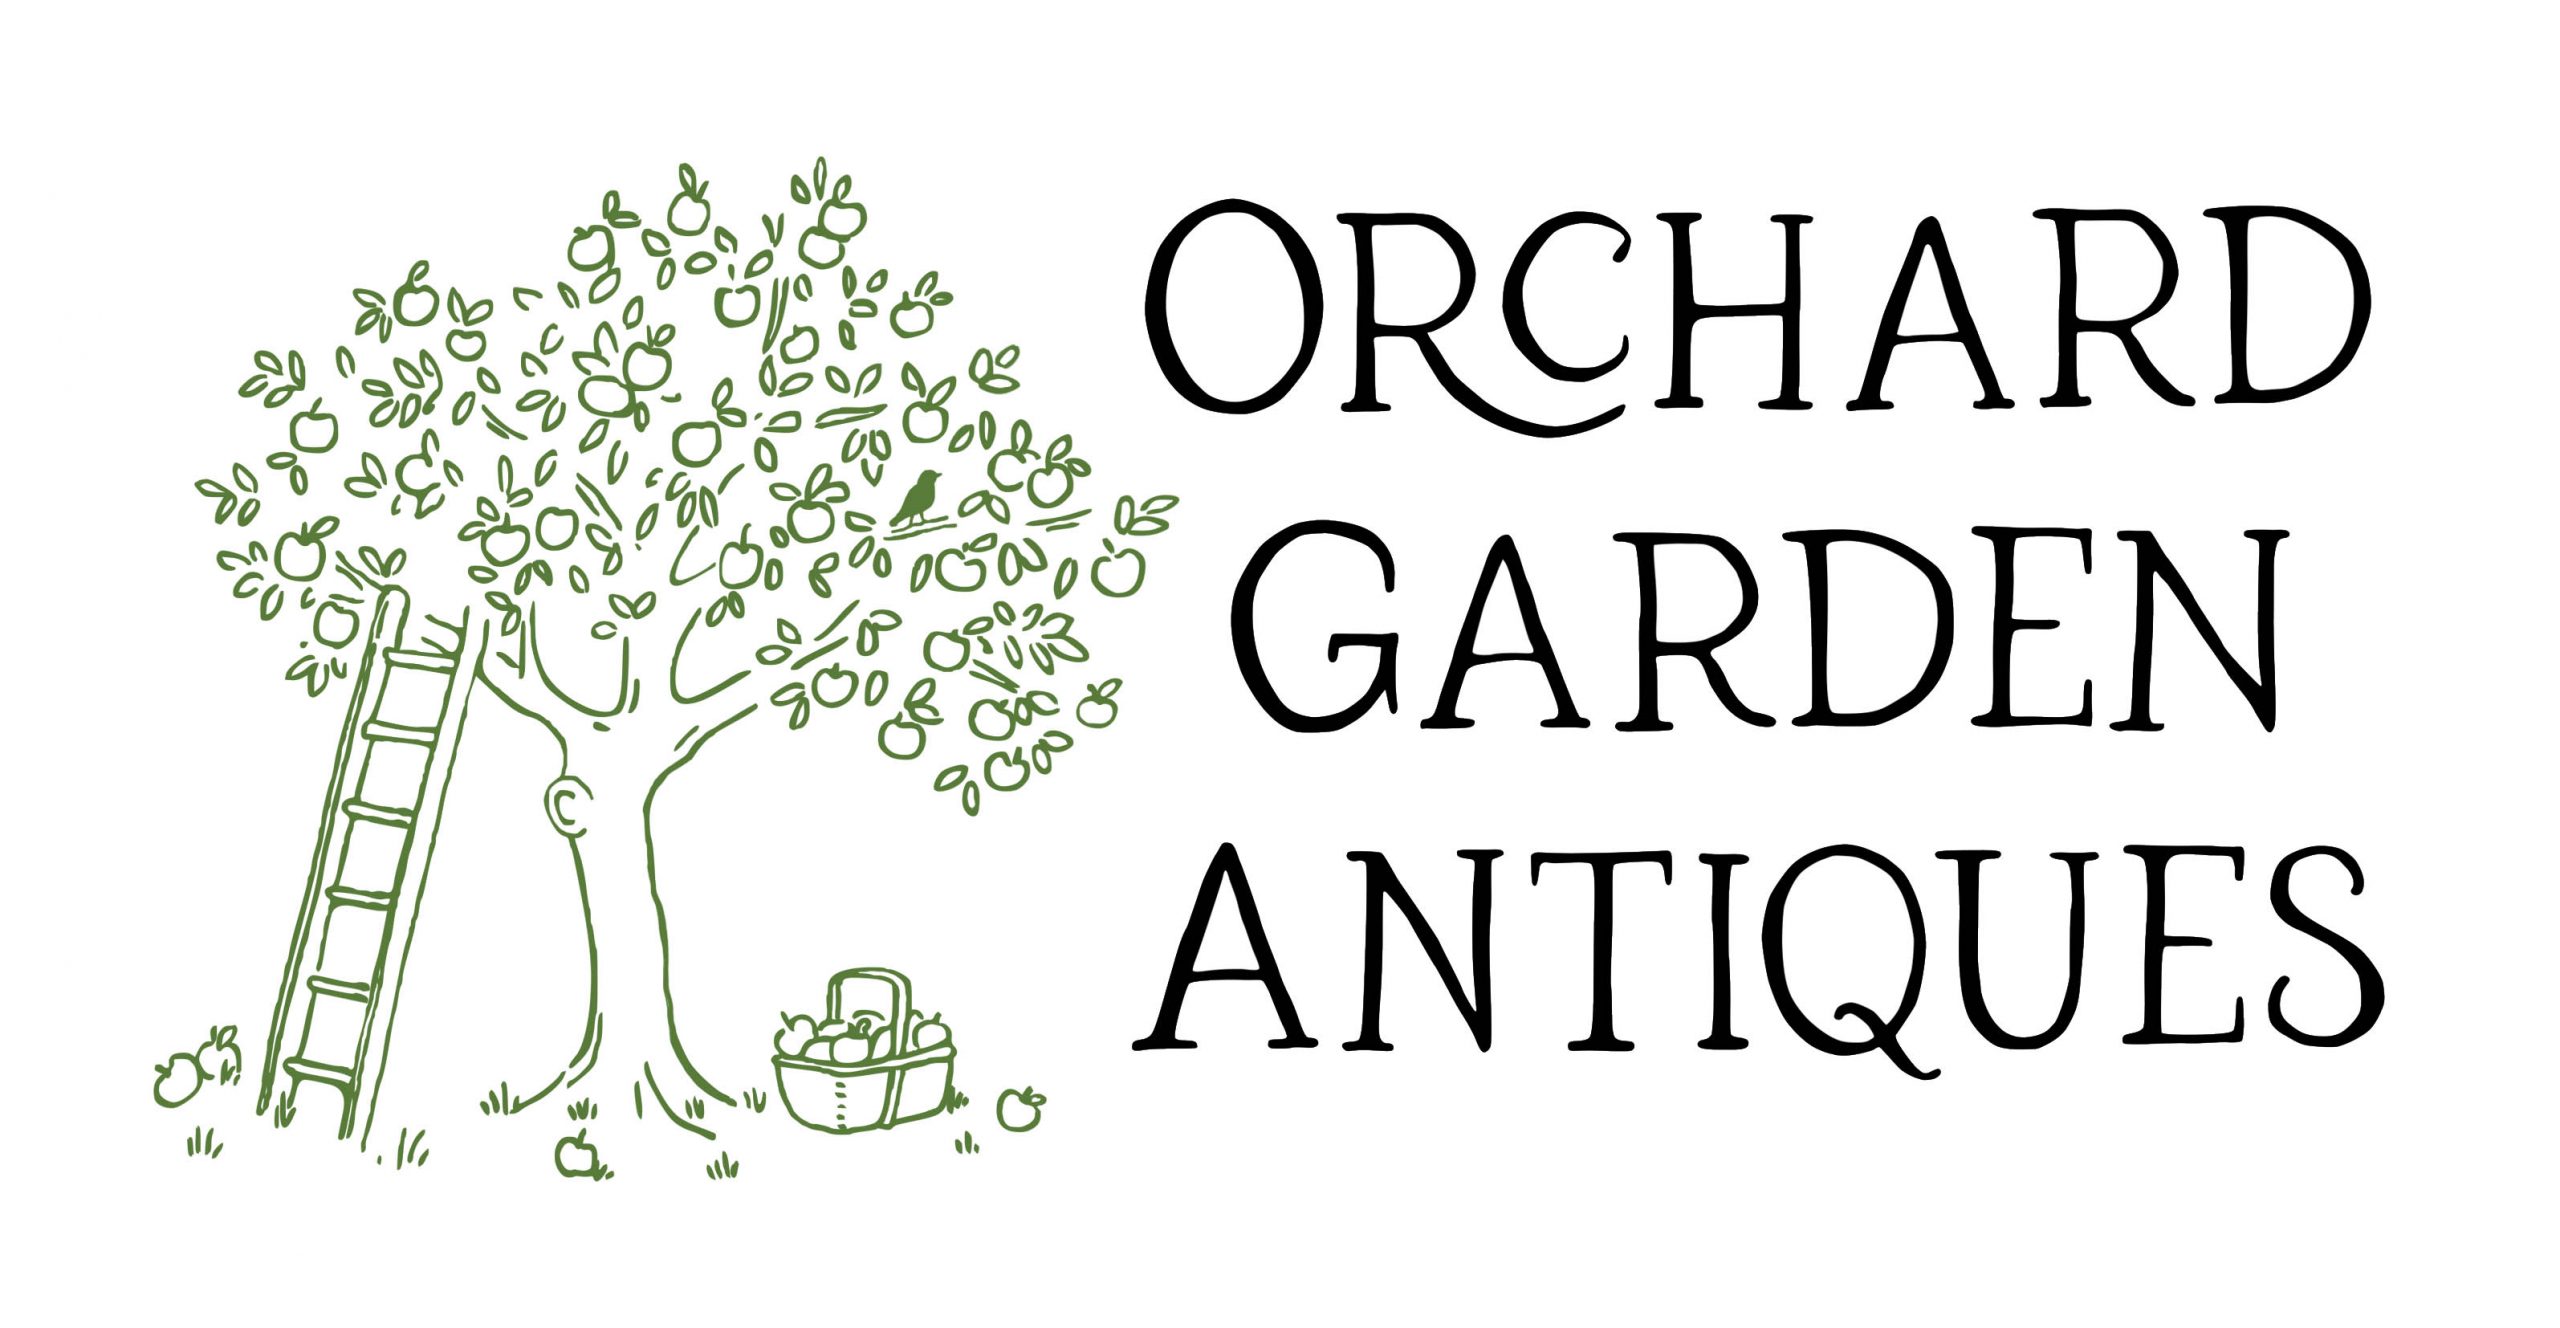 Orchard Garden Antiques